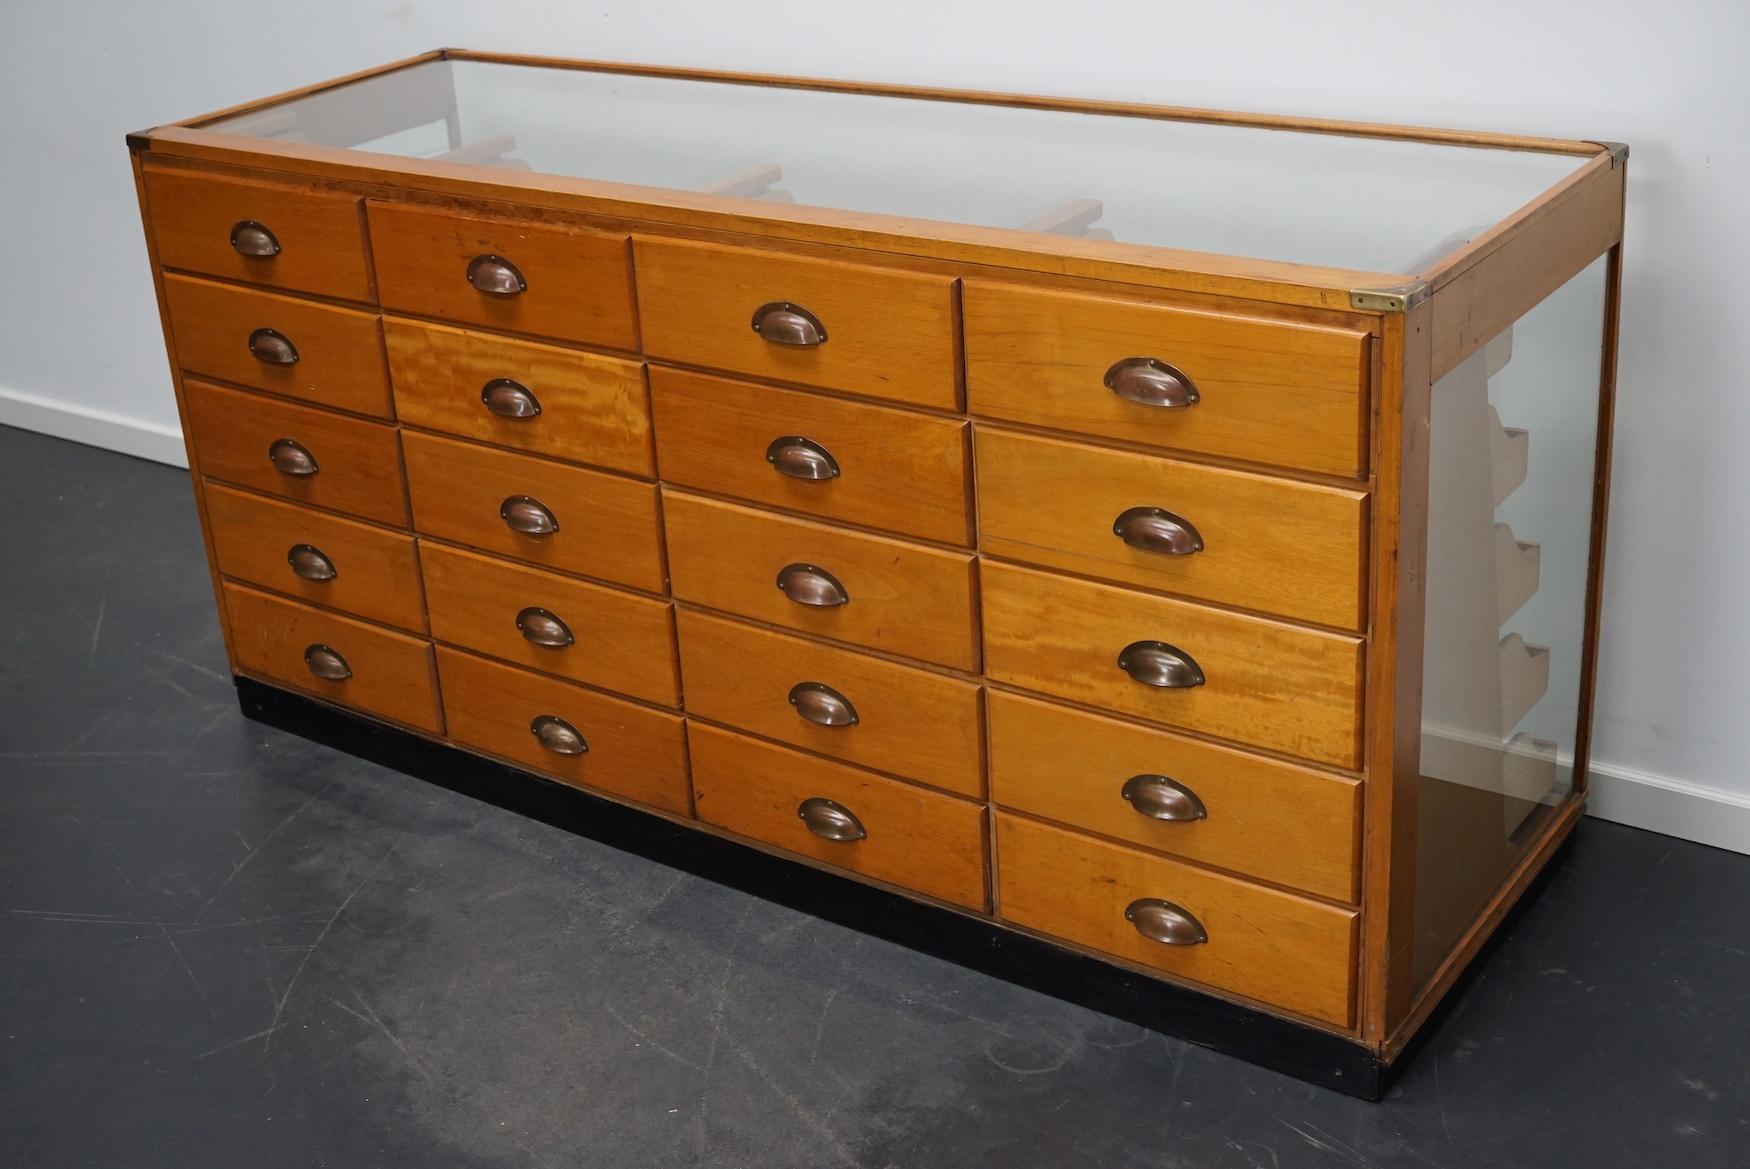 This vintage maple haberdashery shop counter dates from the 1930s and was made in England. It features a solid wooden frame with brass details, a glass casing and drawers in maple with copper handles.
 